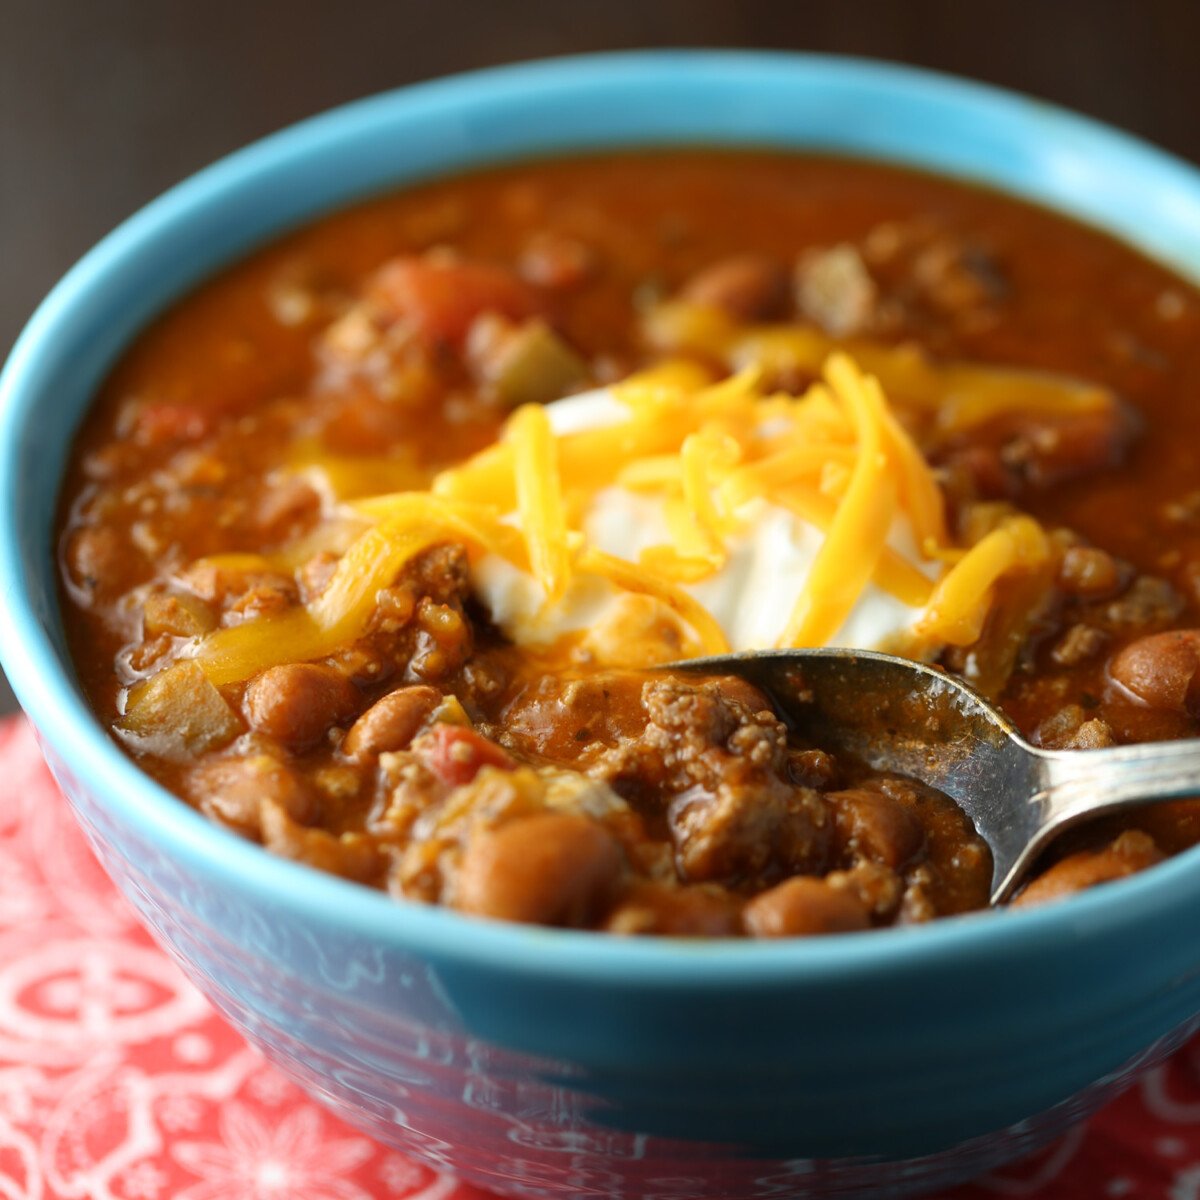 Cooked-all-day-tasting chili in under 30 mins? Watch this magic trick